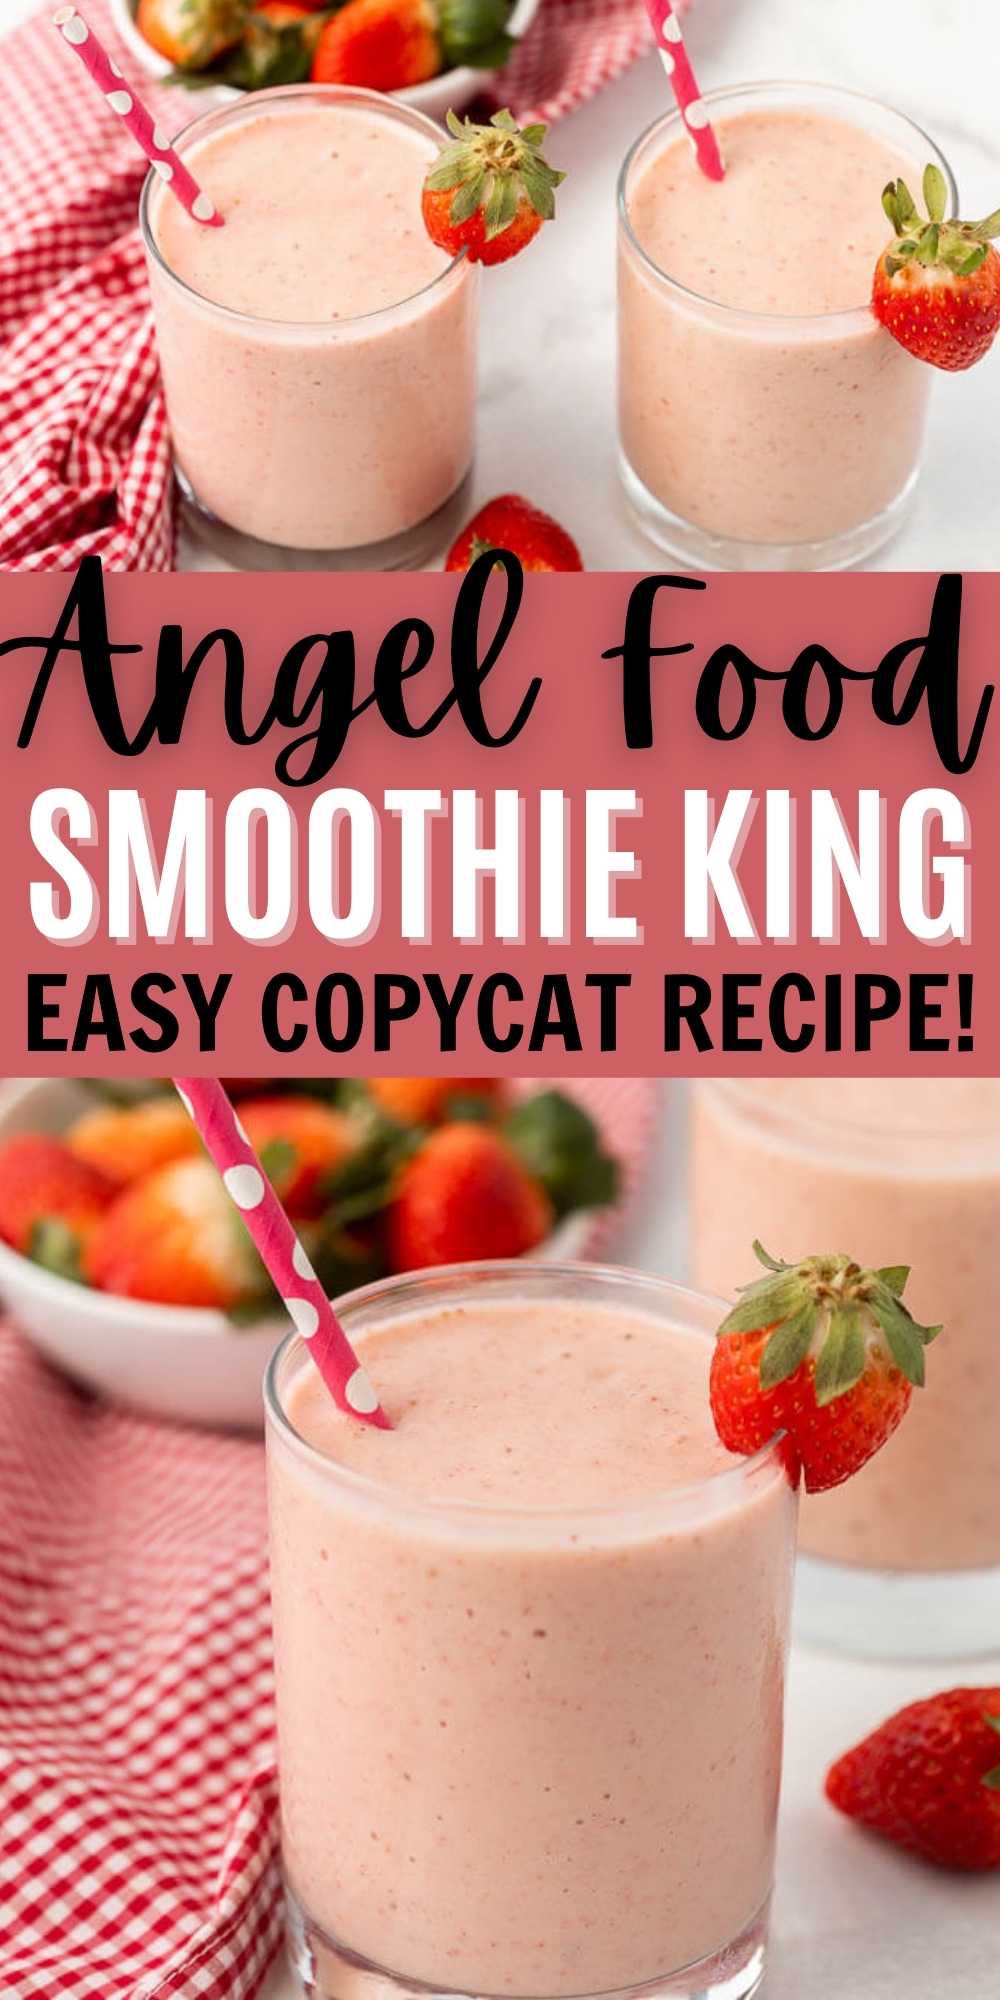 Angel Food Smoothie King Recipe is so easy to make and taste amazing. Make this copycat smoothie at home at a fraction of the cost. This Smoothie King copycat Angel Food recipe is easy to make and SO delicious too.  #eatingonadime #copycatrecipes #smoothierecipes #strawberryrecipes 
